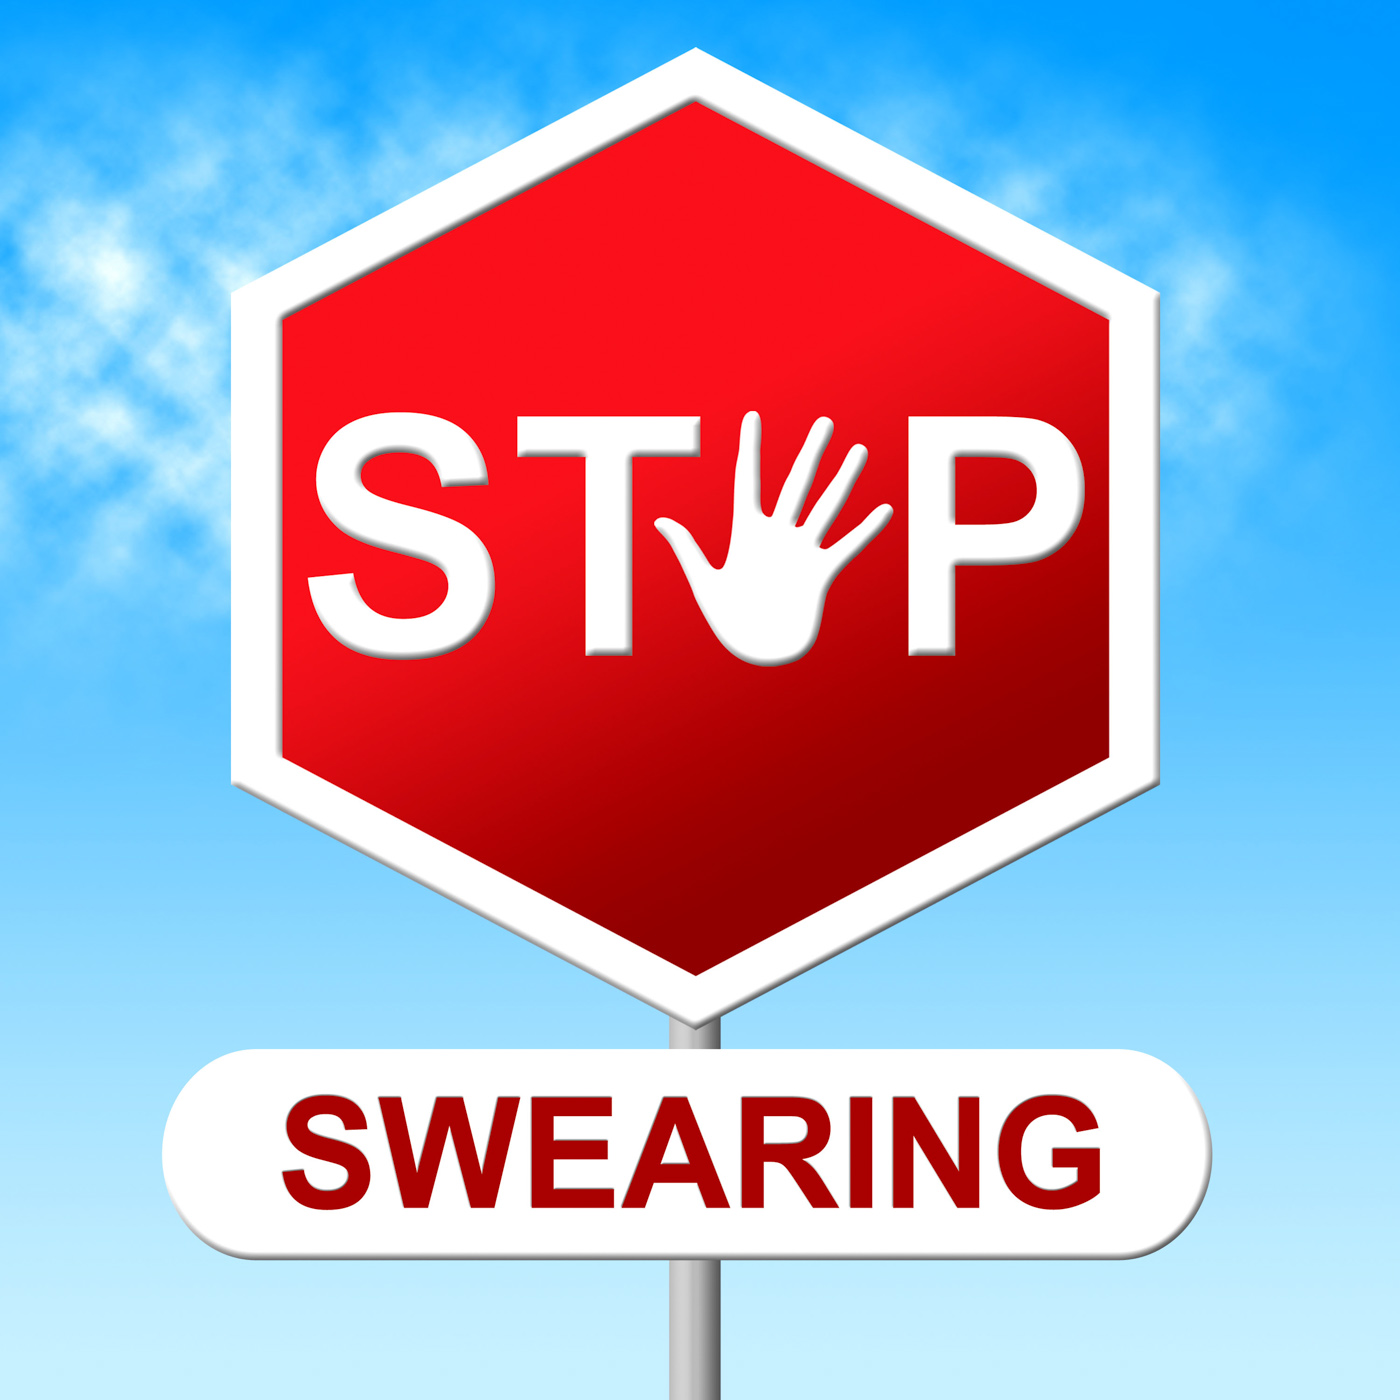 Swearing stop indicates bad words and control photo